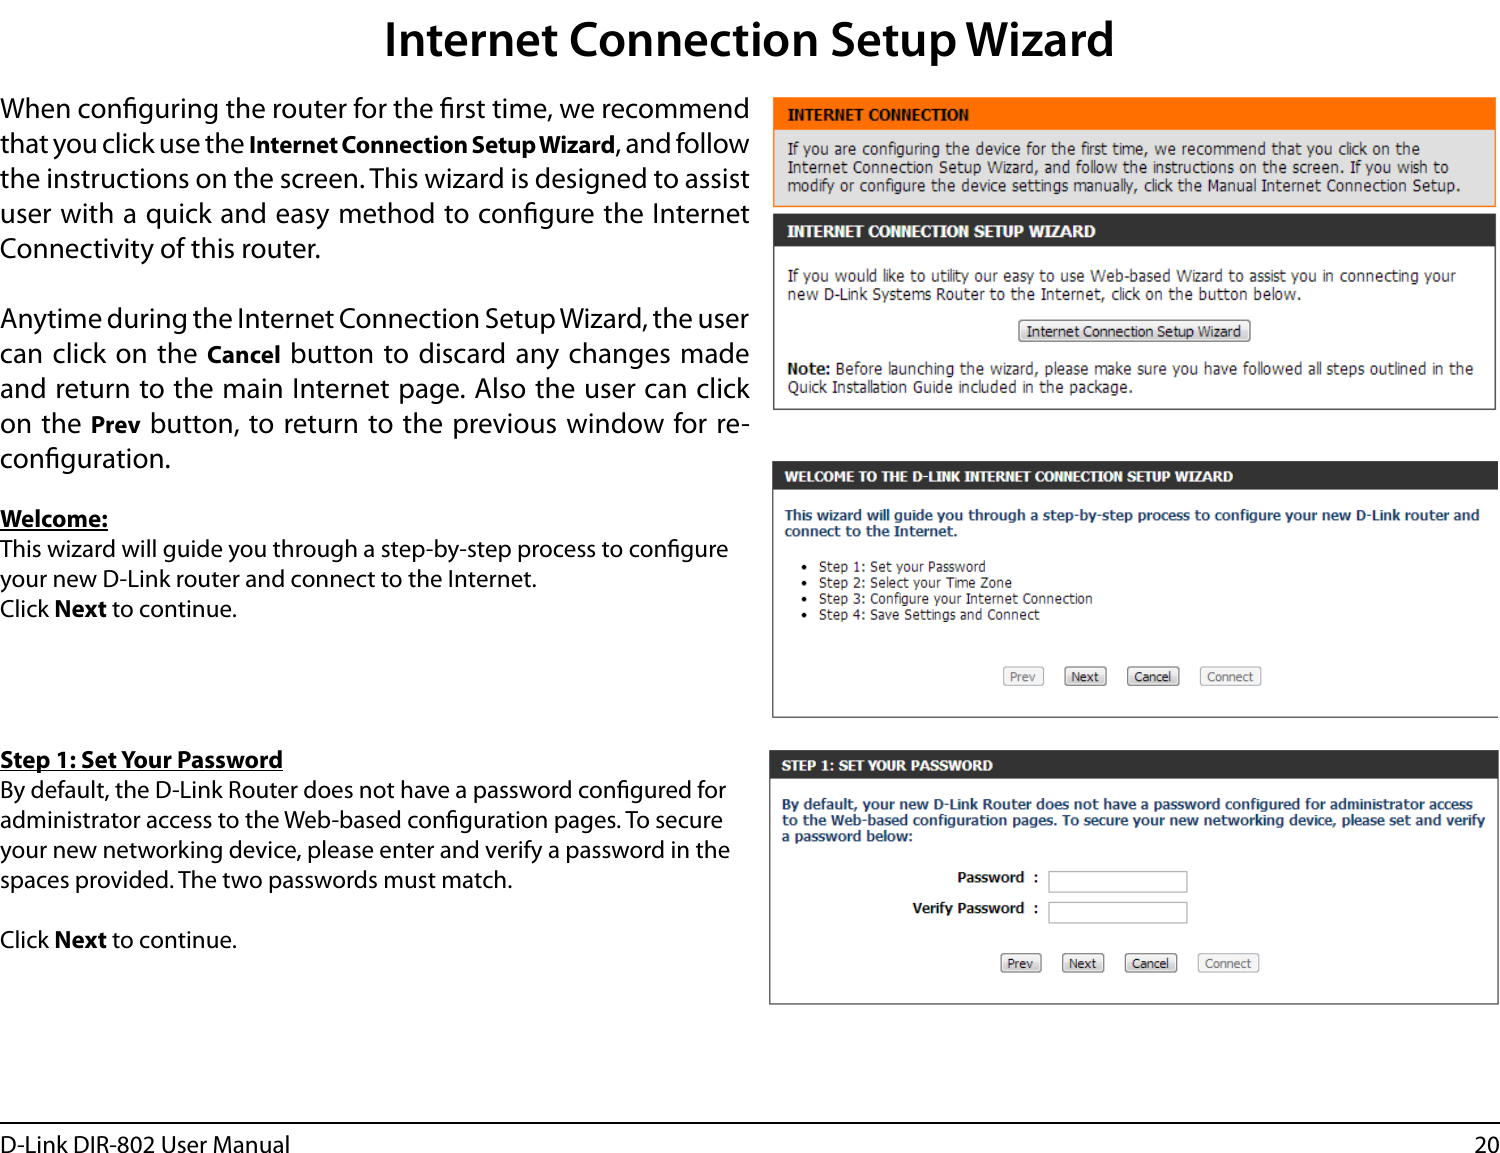 20D-Link DIR-802 User ManualInternet Connection Setup WizardWhen conguring the router for the rst time, we recommend that you click use the Internet Connection Setup Wizard, and follow the instructions on the screen. This wizard is designed to assist user with a quick and easy method to congure the Internet Connectivity of this router.Anytime during the Internet Connection Setup Wizard, the user can click on  the  Cancel button to discard any changes made and return to the main Internet page. Also the user can click on the Prev button, to return to the previous window for re-conguration.Welcome:This wizard will guide you through a step-by-step process to congure your new D-Link router and connect to the Internet. Click Next to continue.Step 1: Set Your PasswordBy default, the D-Link Router does not have a password congured for administrator access to the Web-based conguration pages. To secure your new networking device, please enter and verify a password in the spaces provided. The two passwords must match.Click Next to continue.